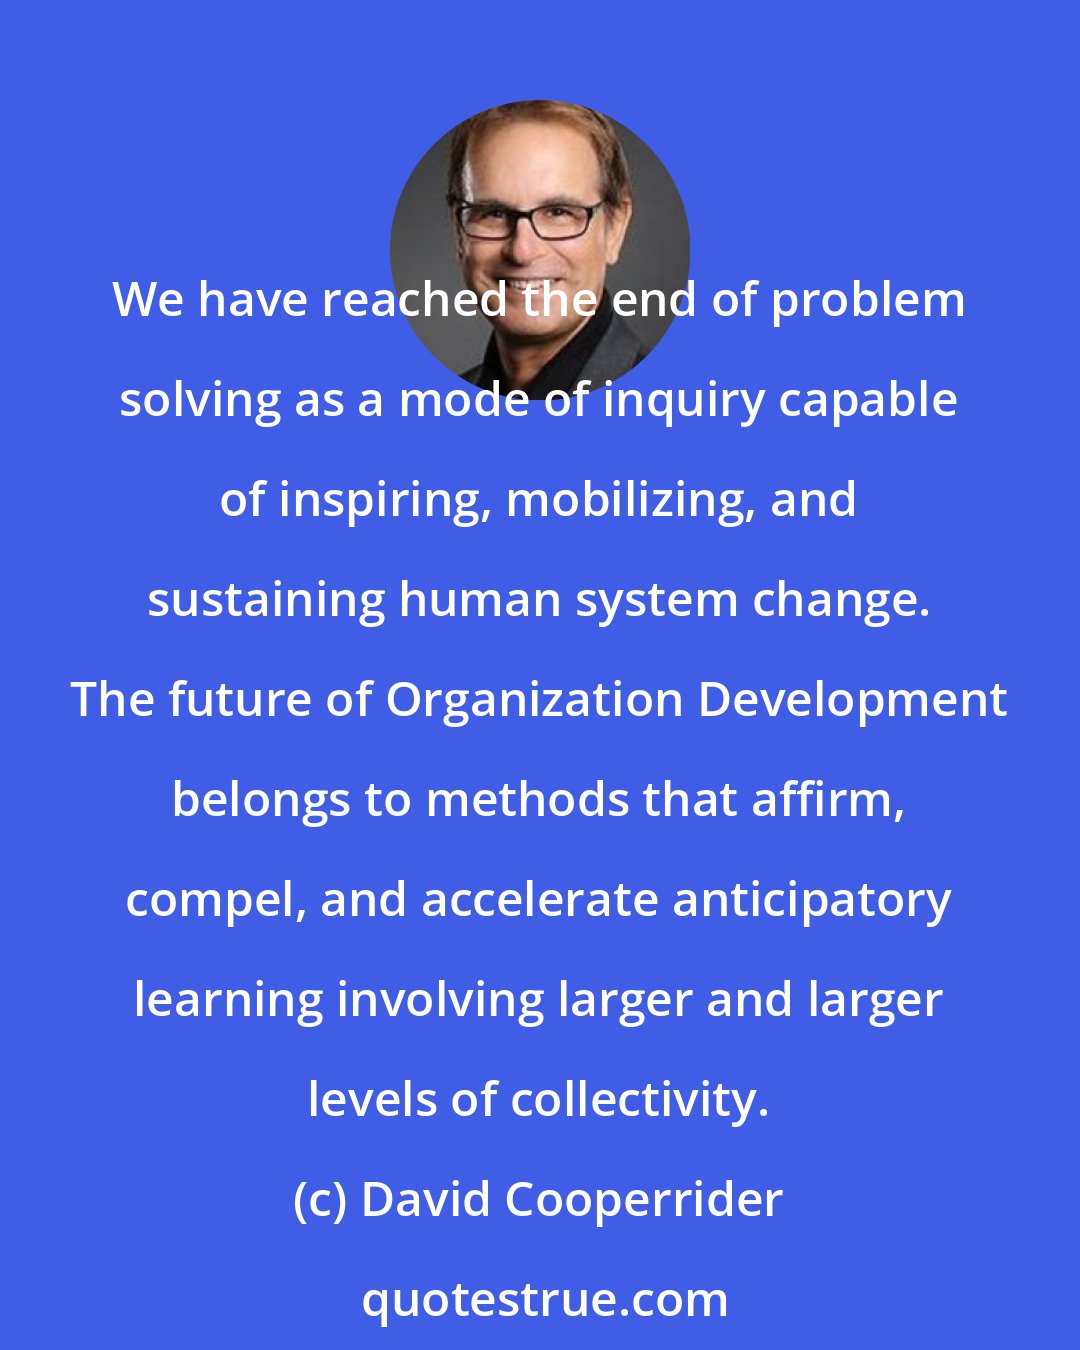 David Cooperrider: We have reached the end of problem solving as a mode of inquiry capable of inspiring, mobilizing, and sustaining human system change. The future of Organization Development belongs to methods that affirm, compel, and accelerate anticipatory learning involving larger and larger levels of collectivity.